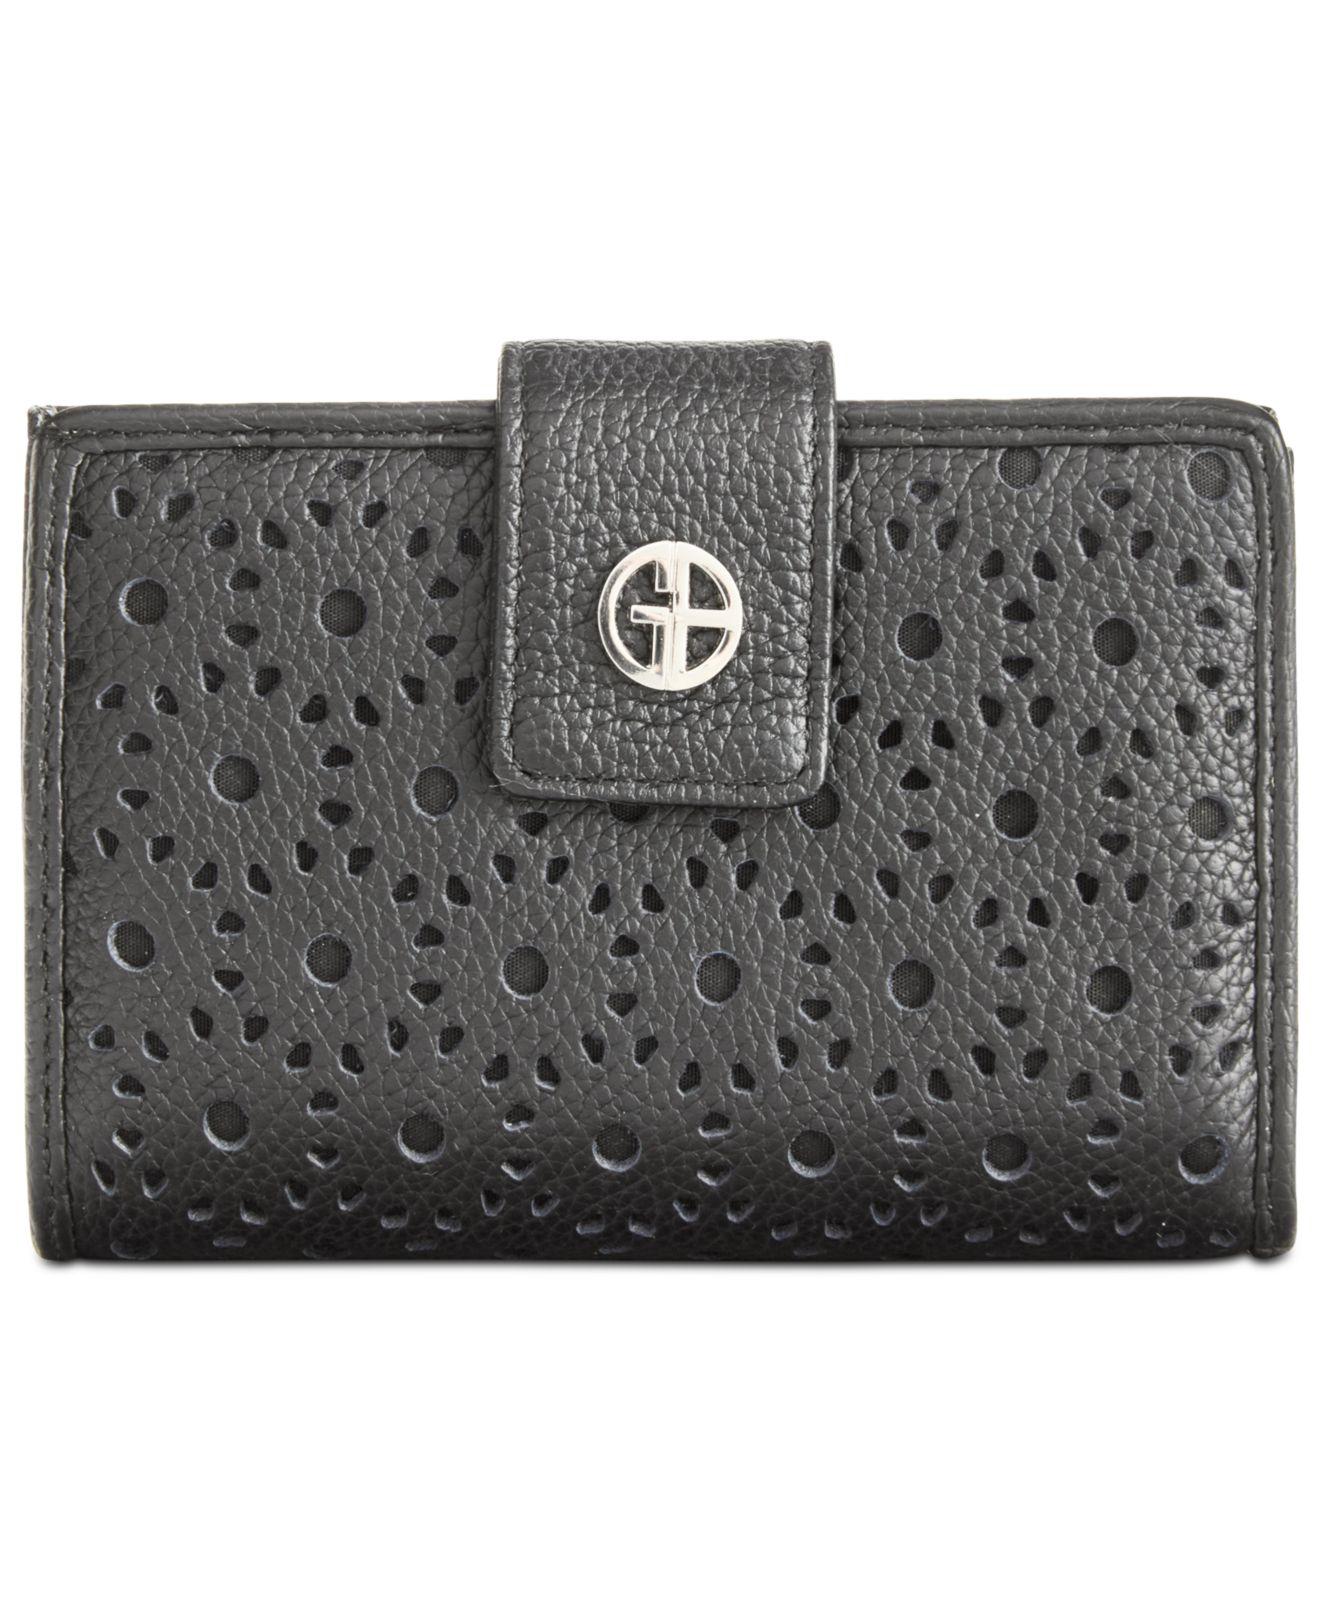 Giani Bernini Leather Softy Perforated Wallet in Black/Black (Black) - Lyst